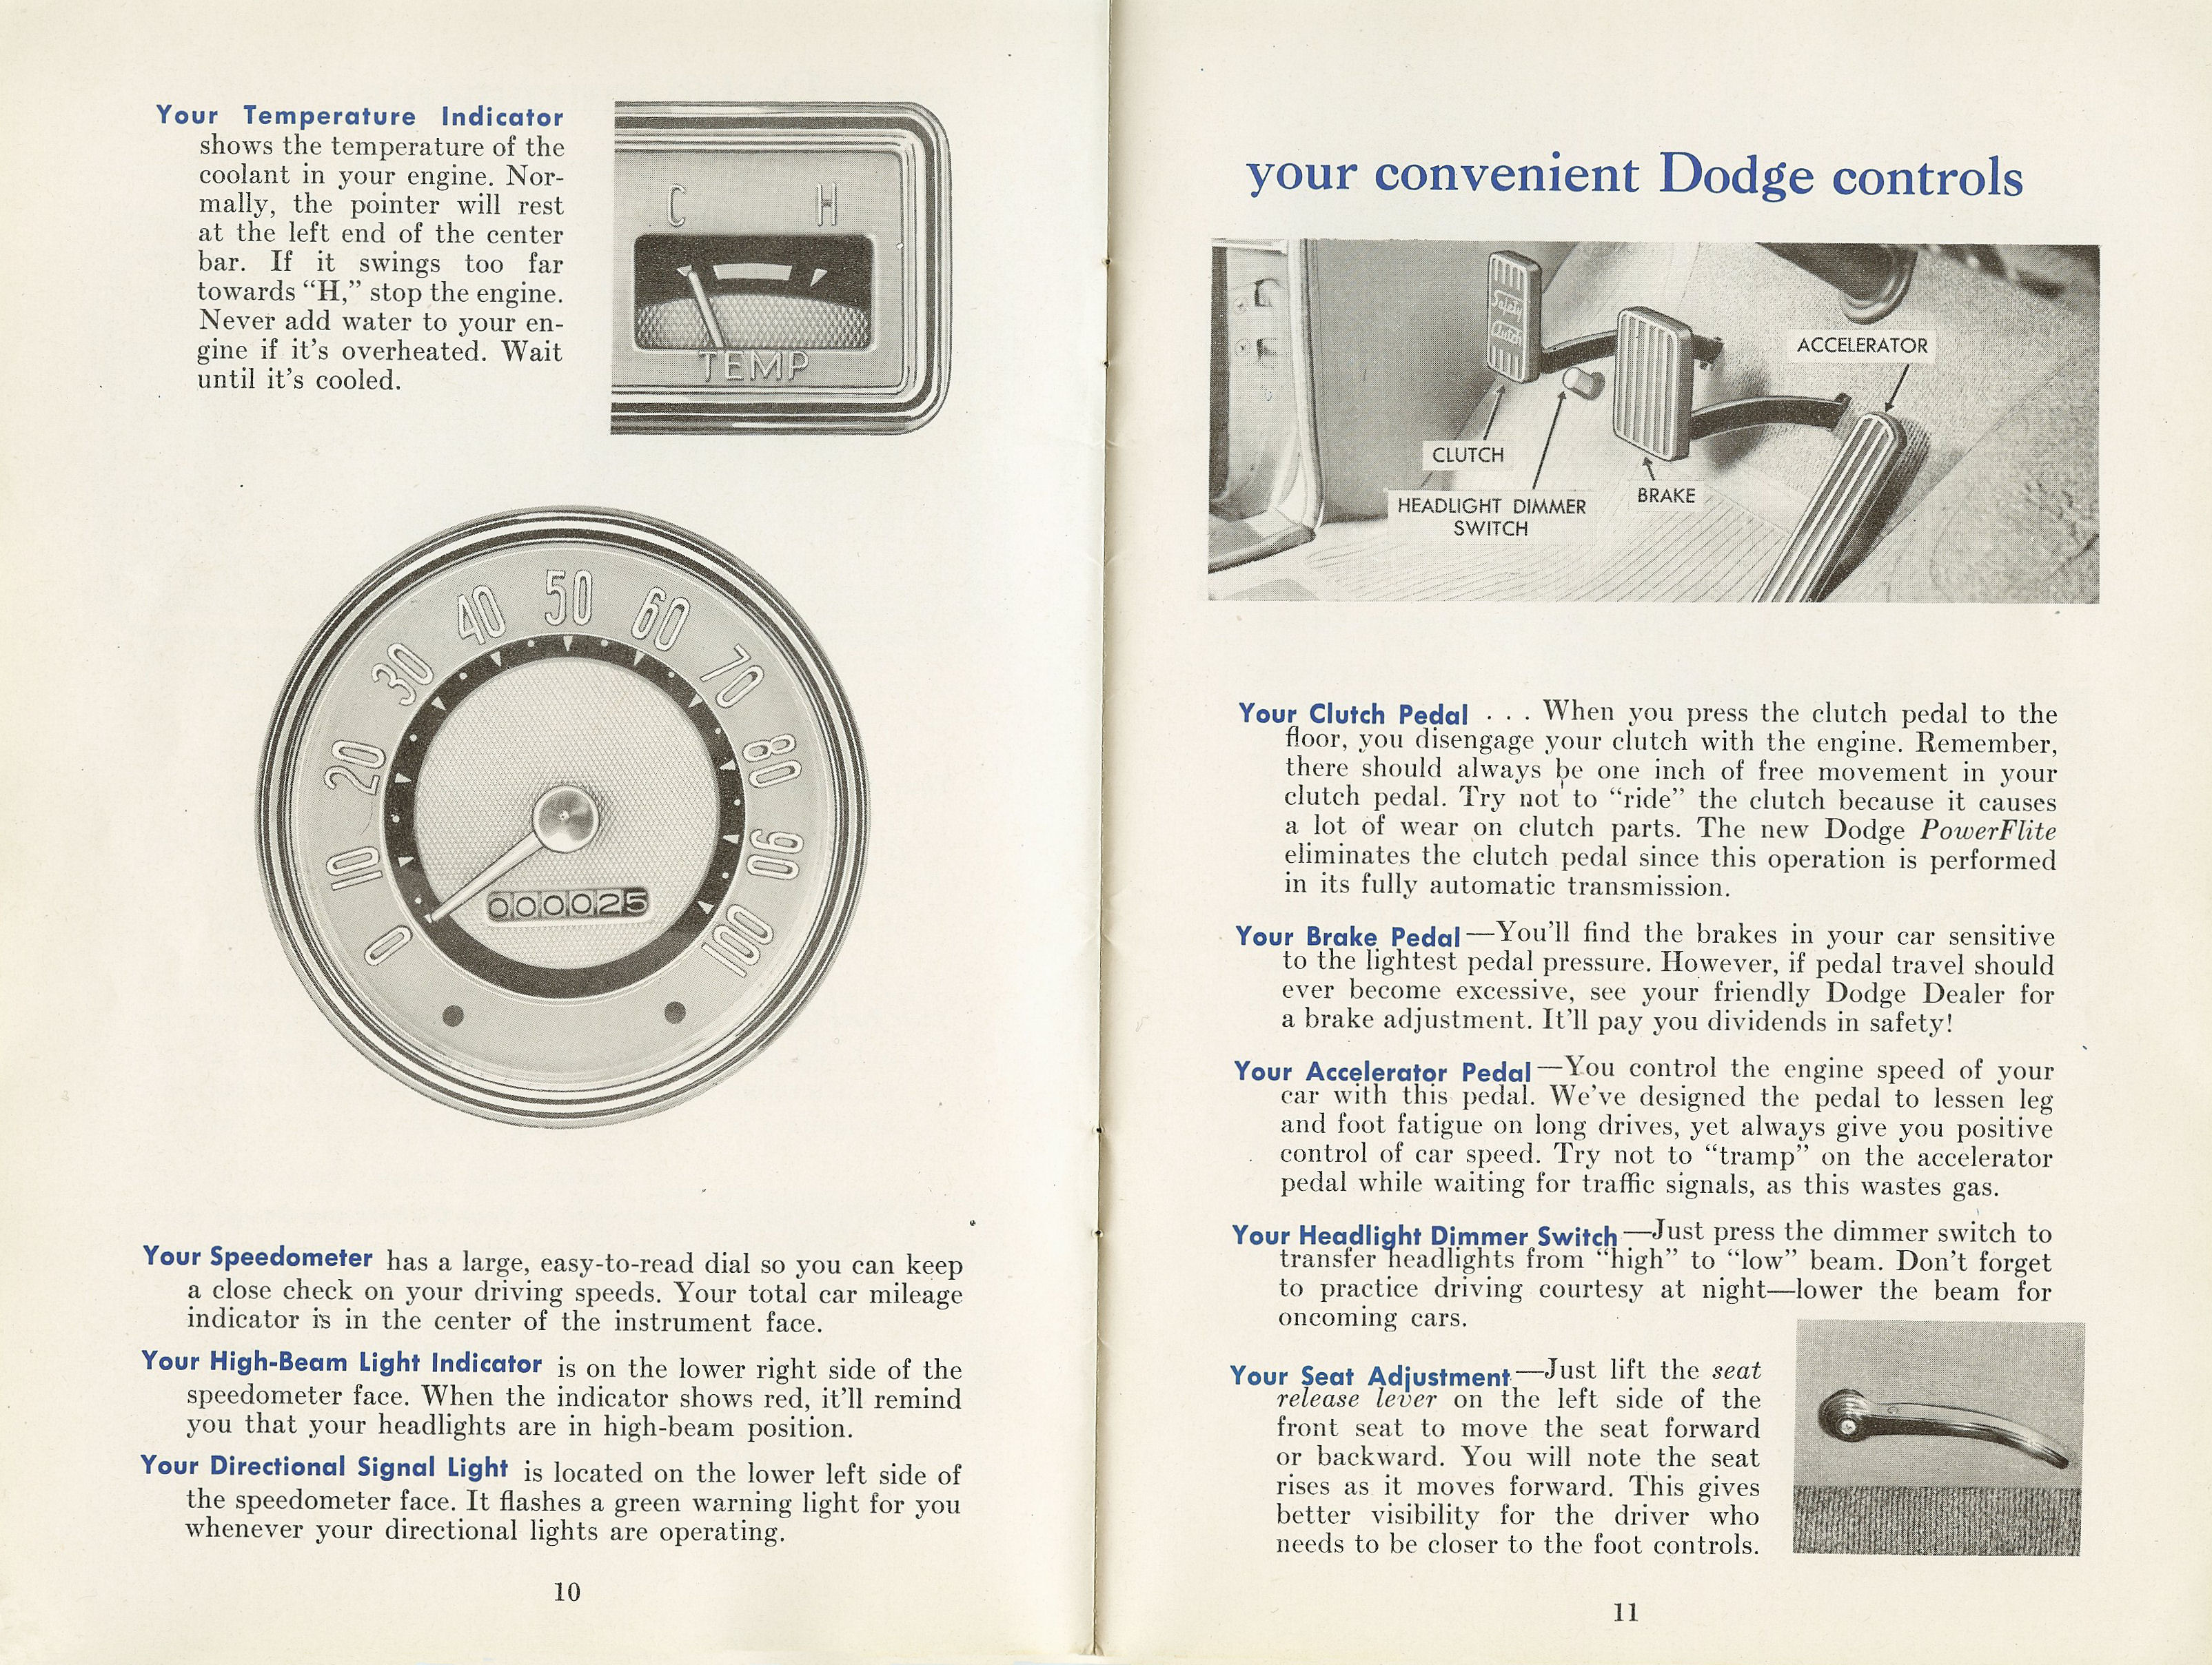 1954 Dodge Owners Manual-10-11